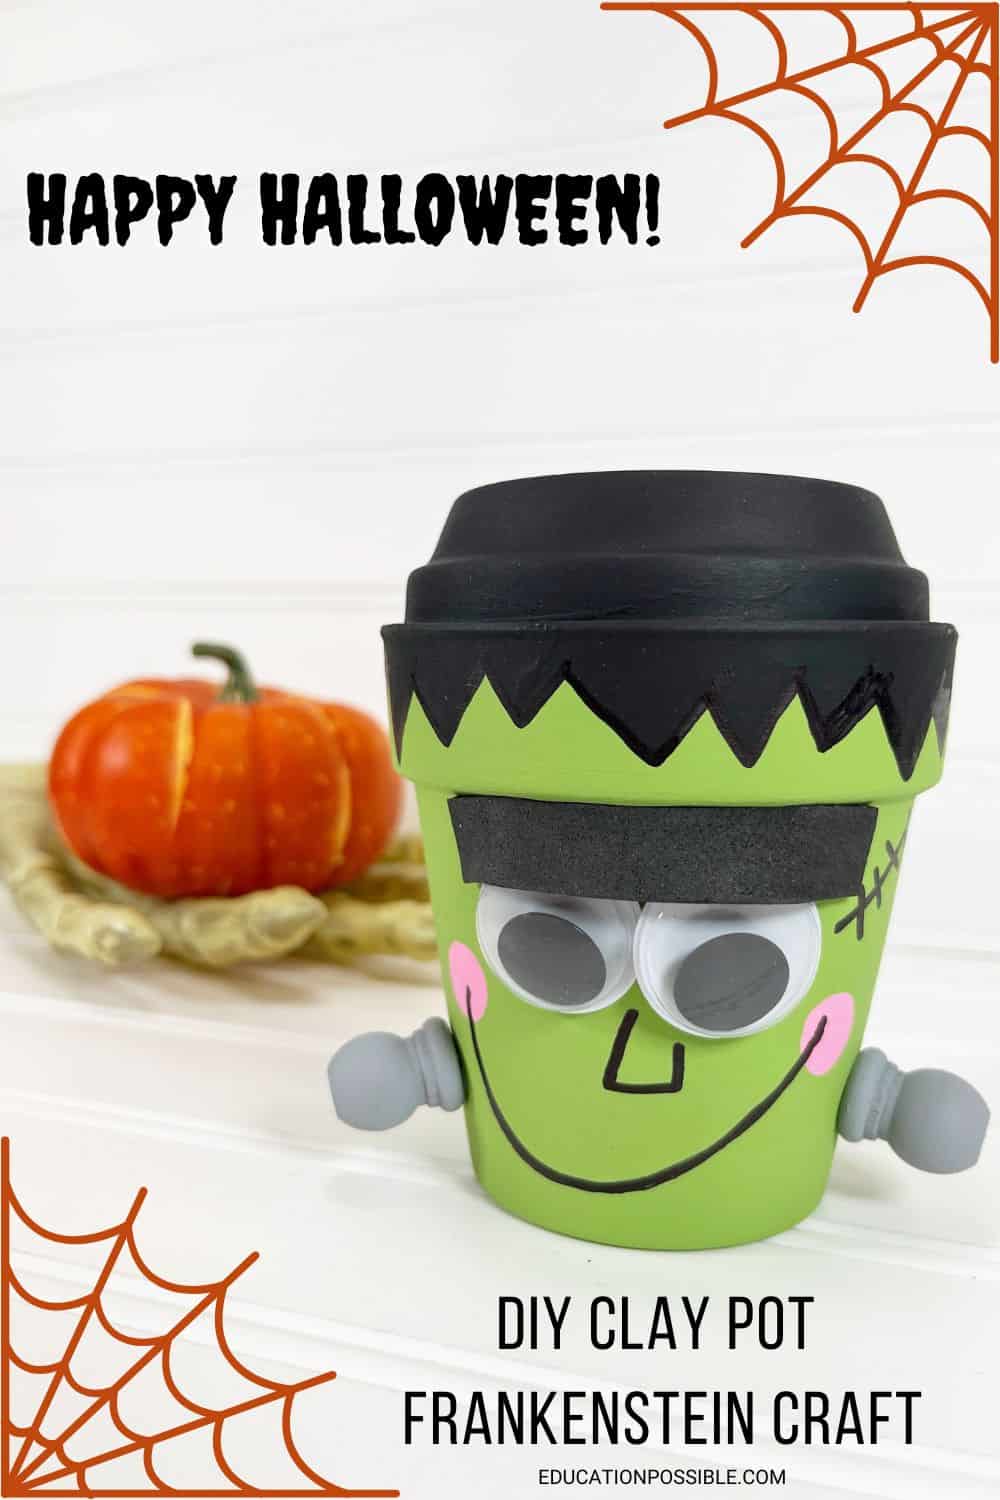 Clay pot painted like Frankenstein